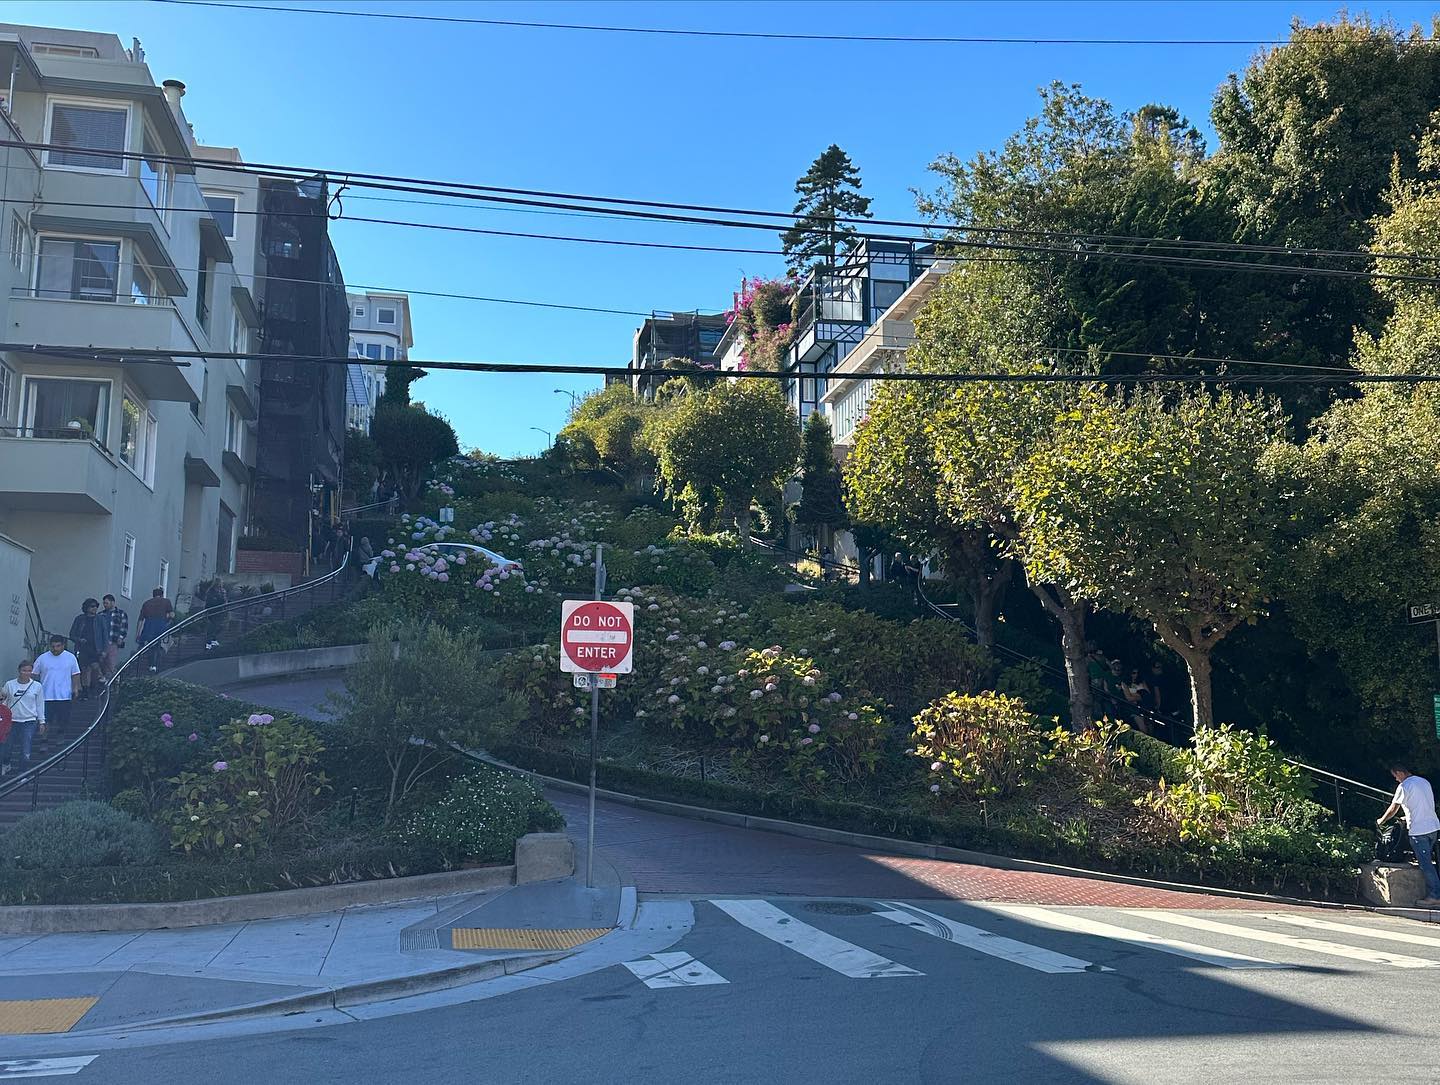 The famous Lombard Street